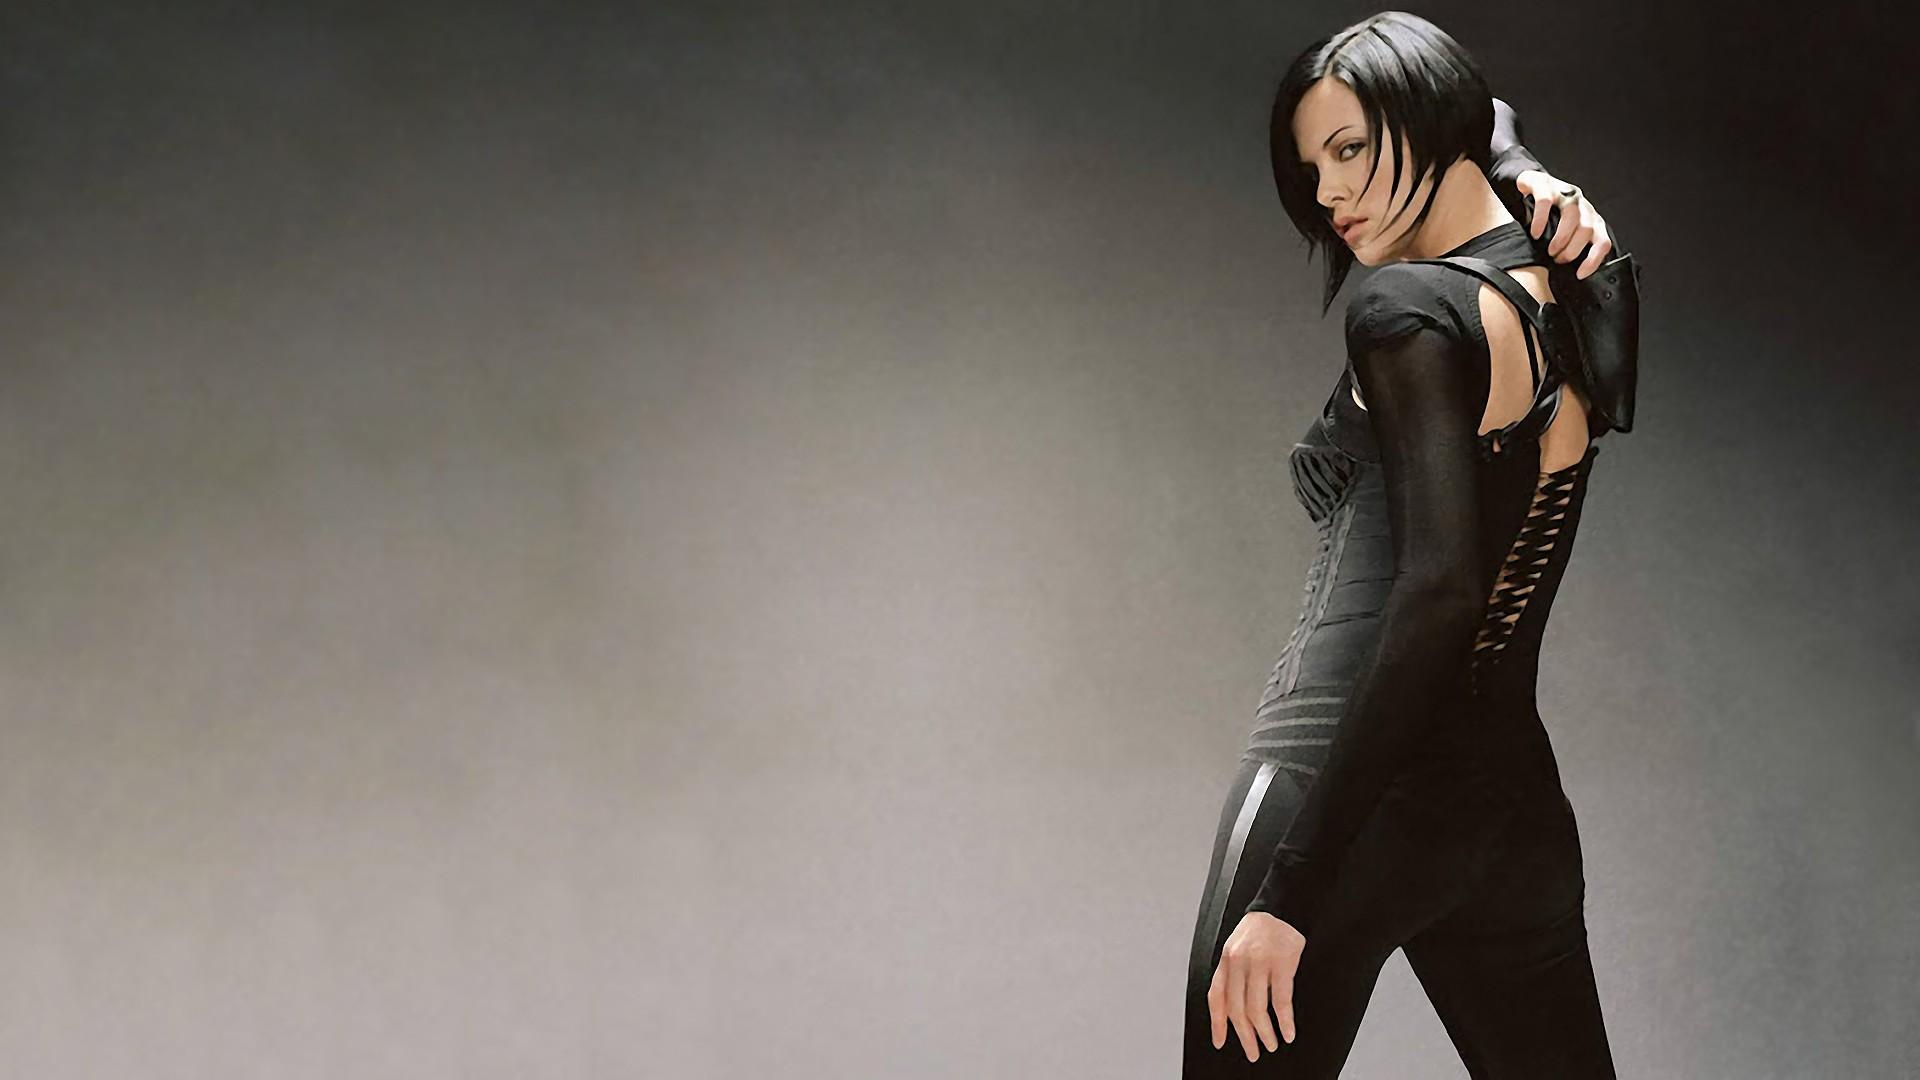 women, guns, movies, actress, Charlize Theron, catsuits, Aeon Flux